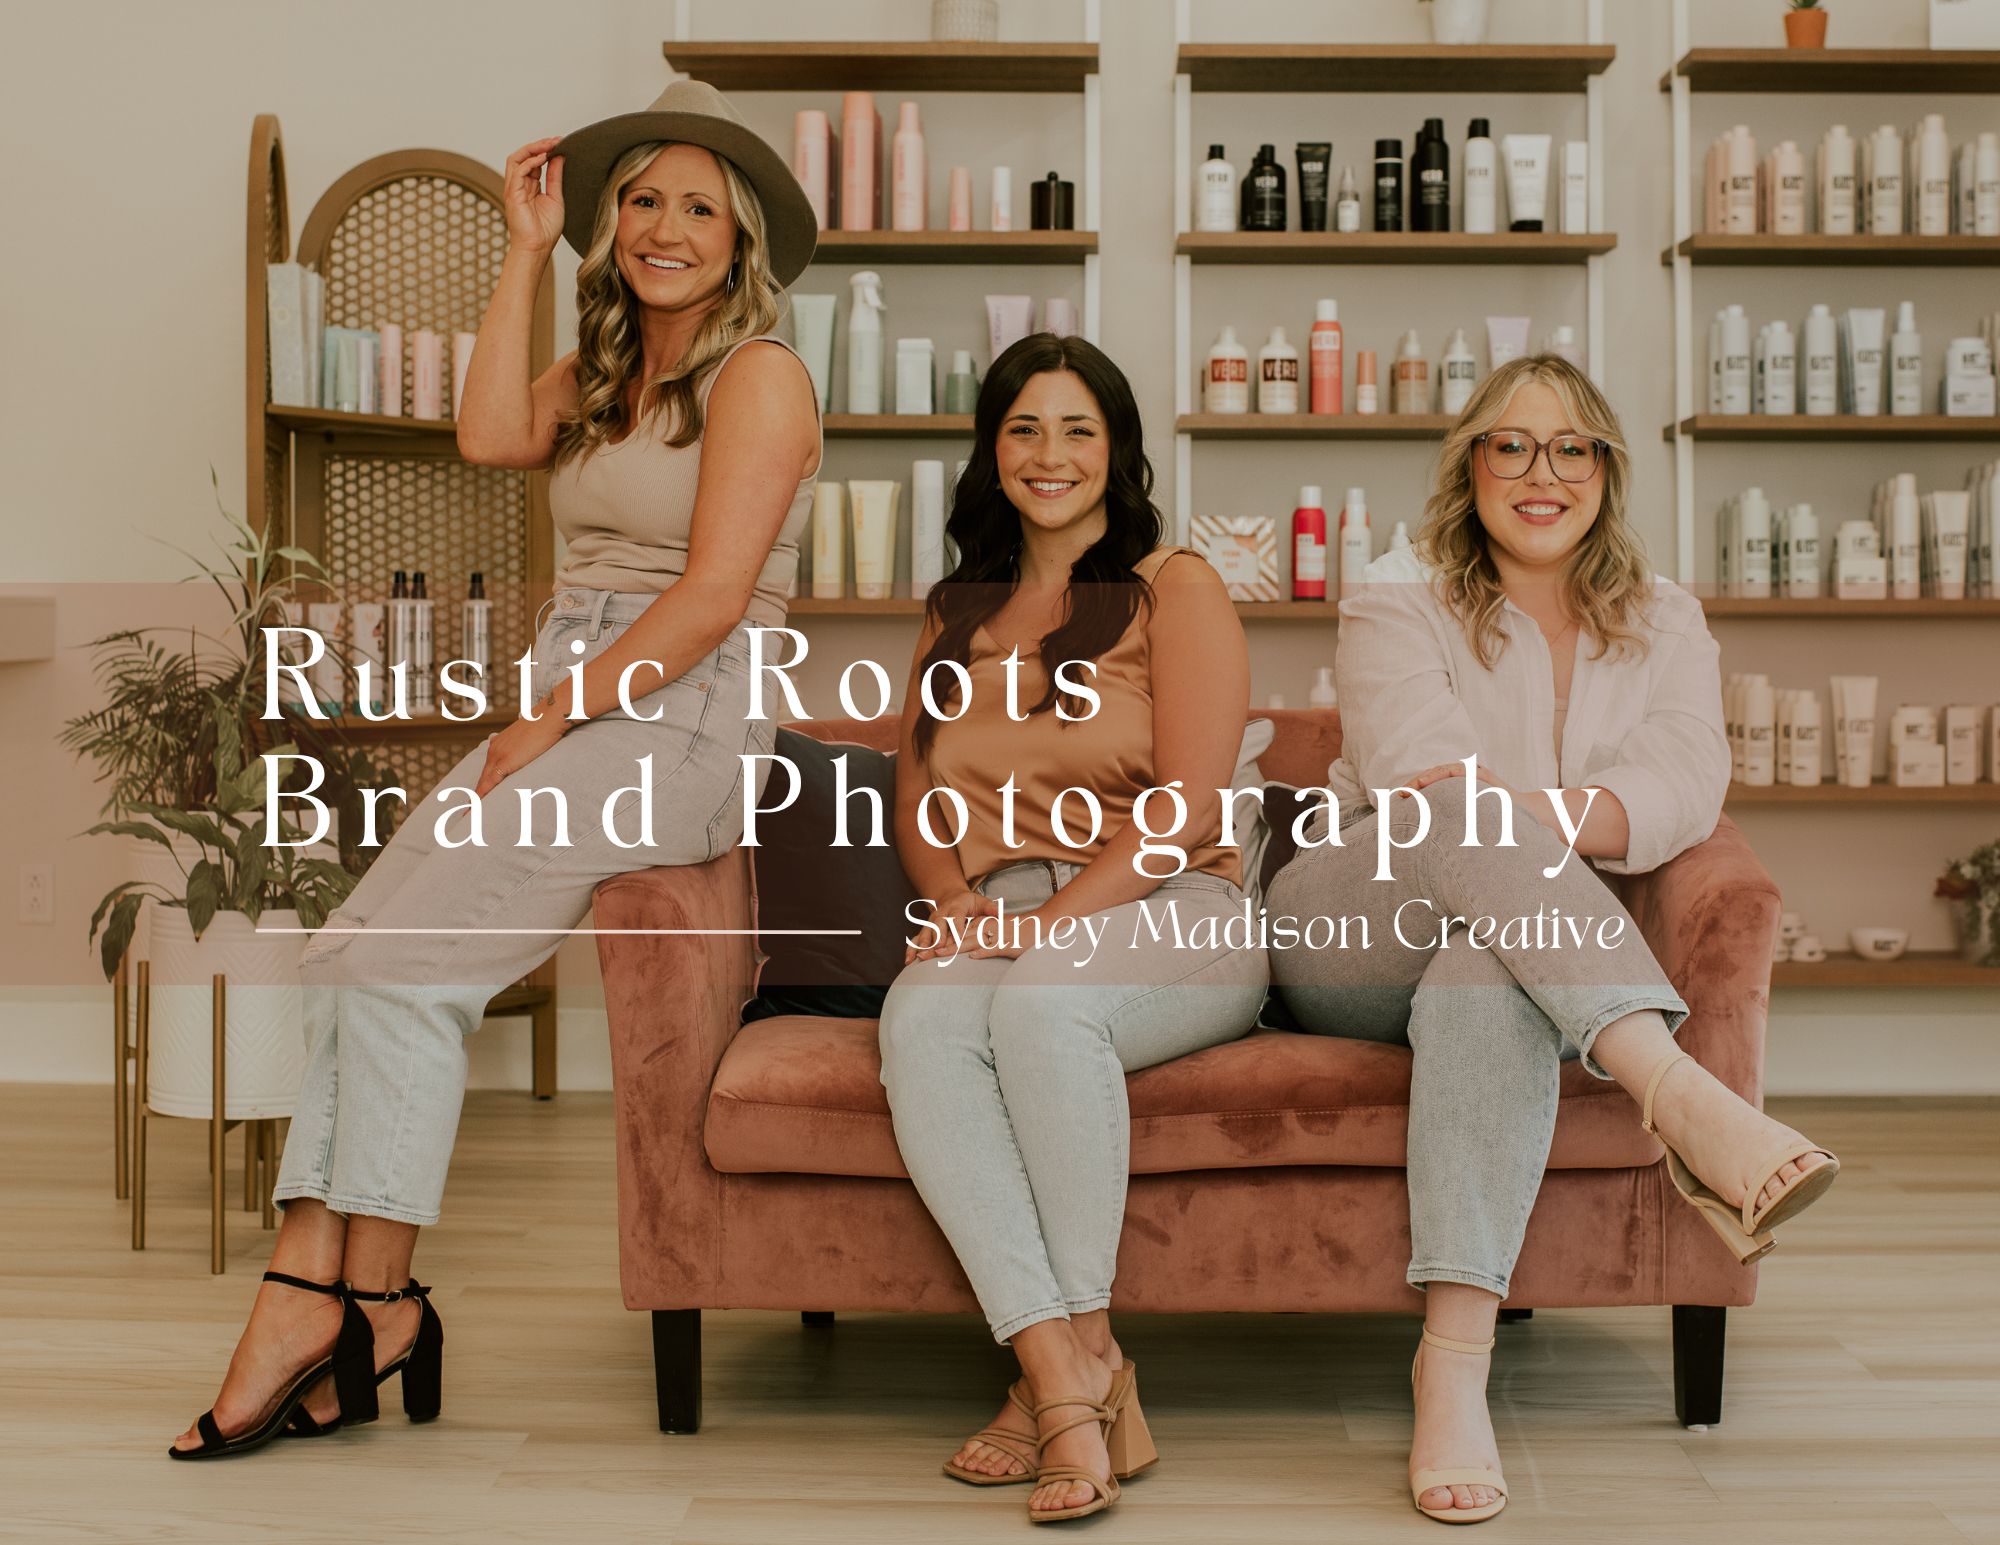 Rustic Roots Branding Photography by Sydney Madison Creative